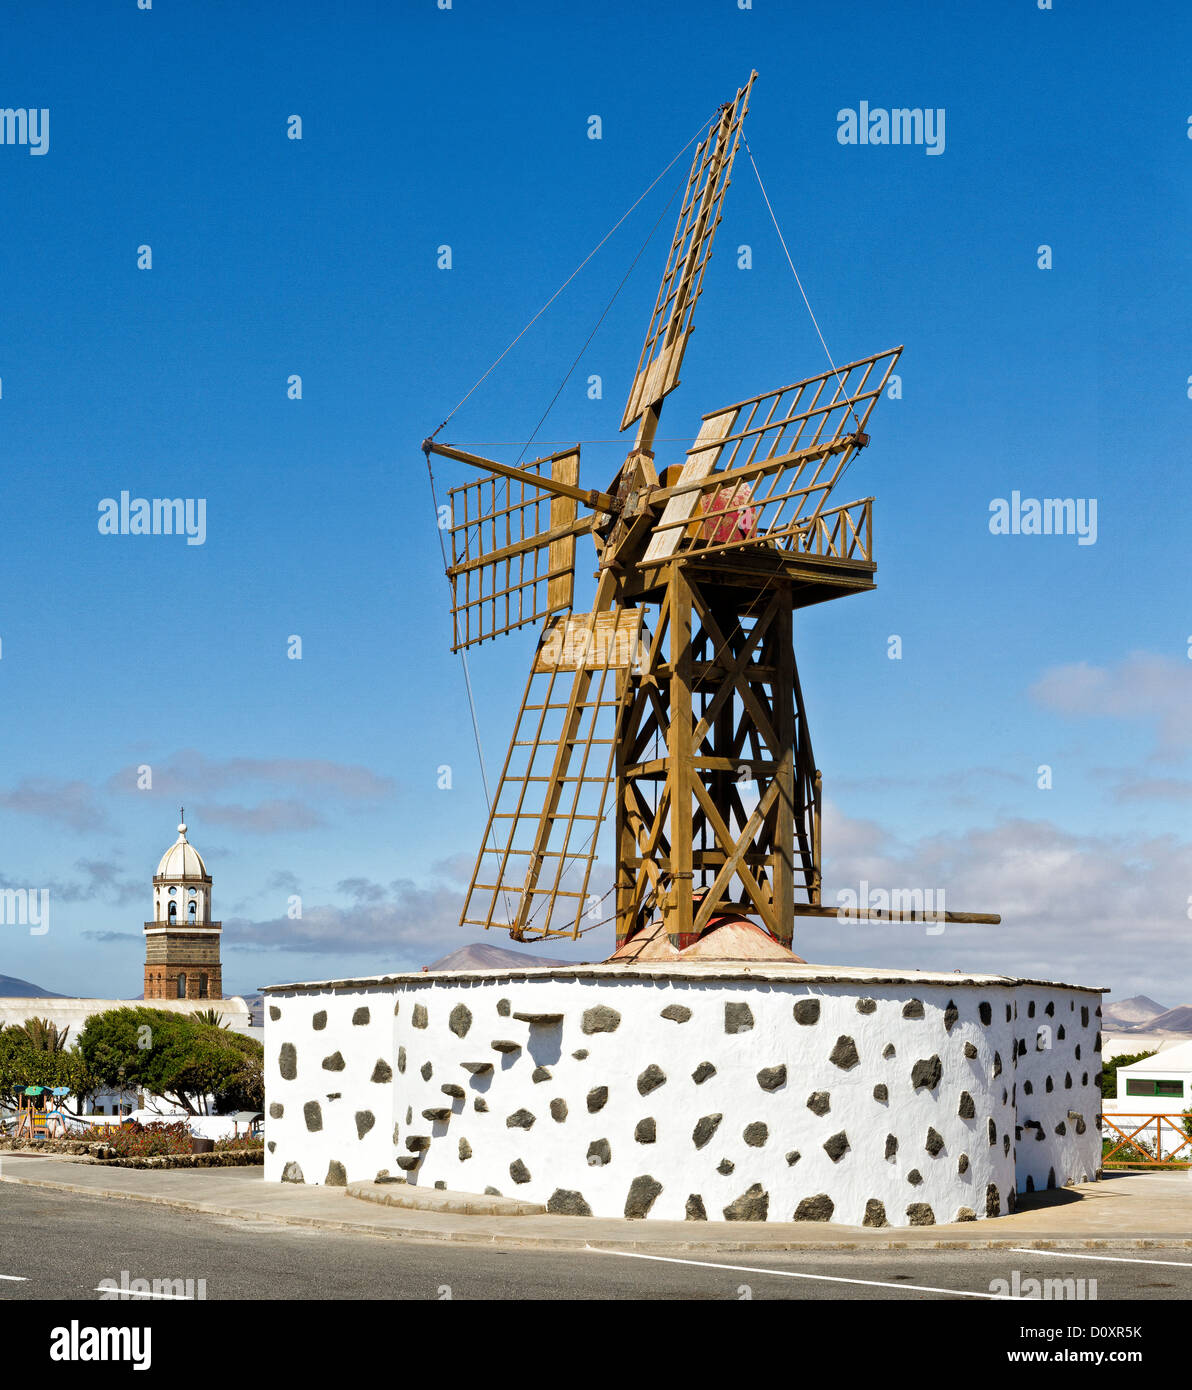 Spain, Lanzarote, Teguise, Skeleton windmill, windmill, summer, Canary Islands, Stock Photo